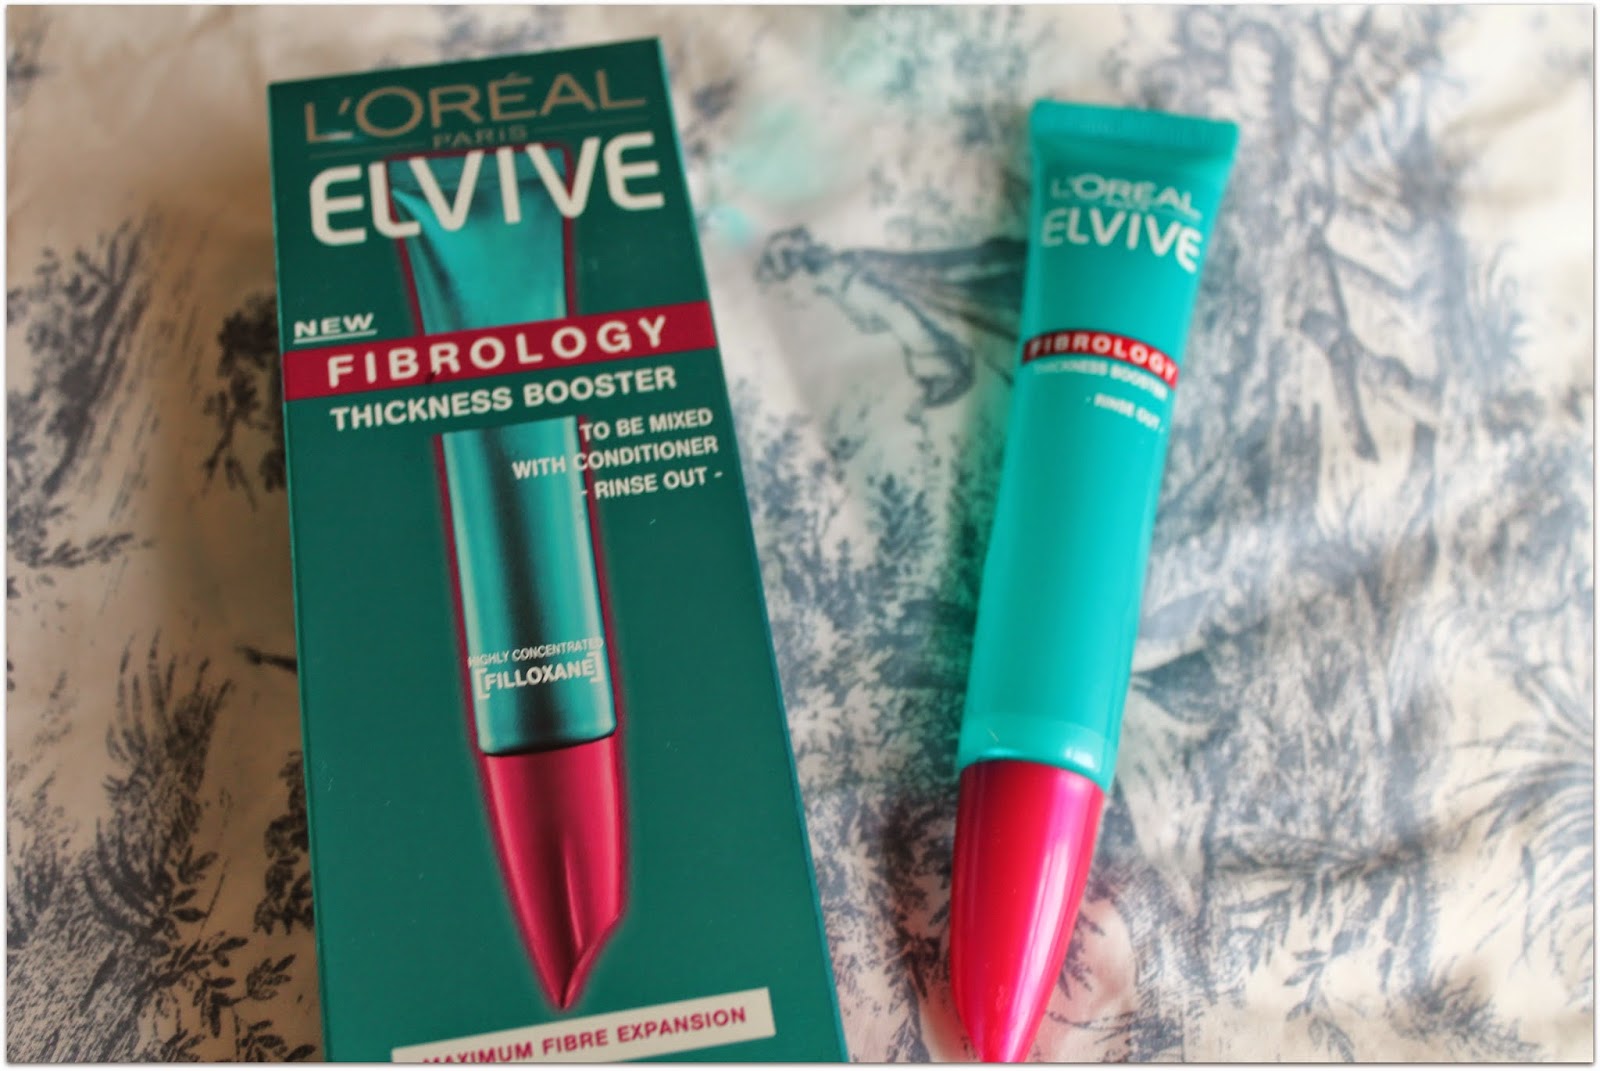 L'Oreal Elvive Fibrology Thickness Booster 